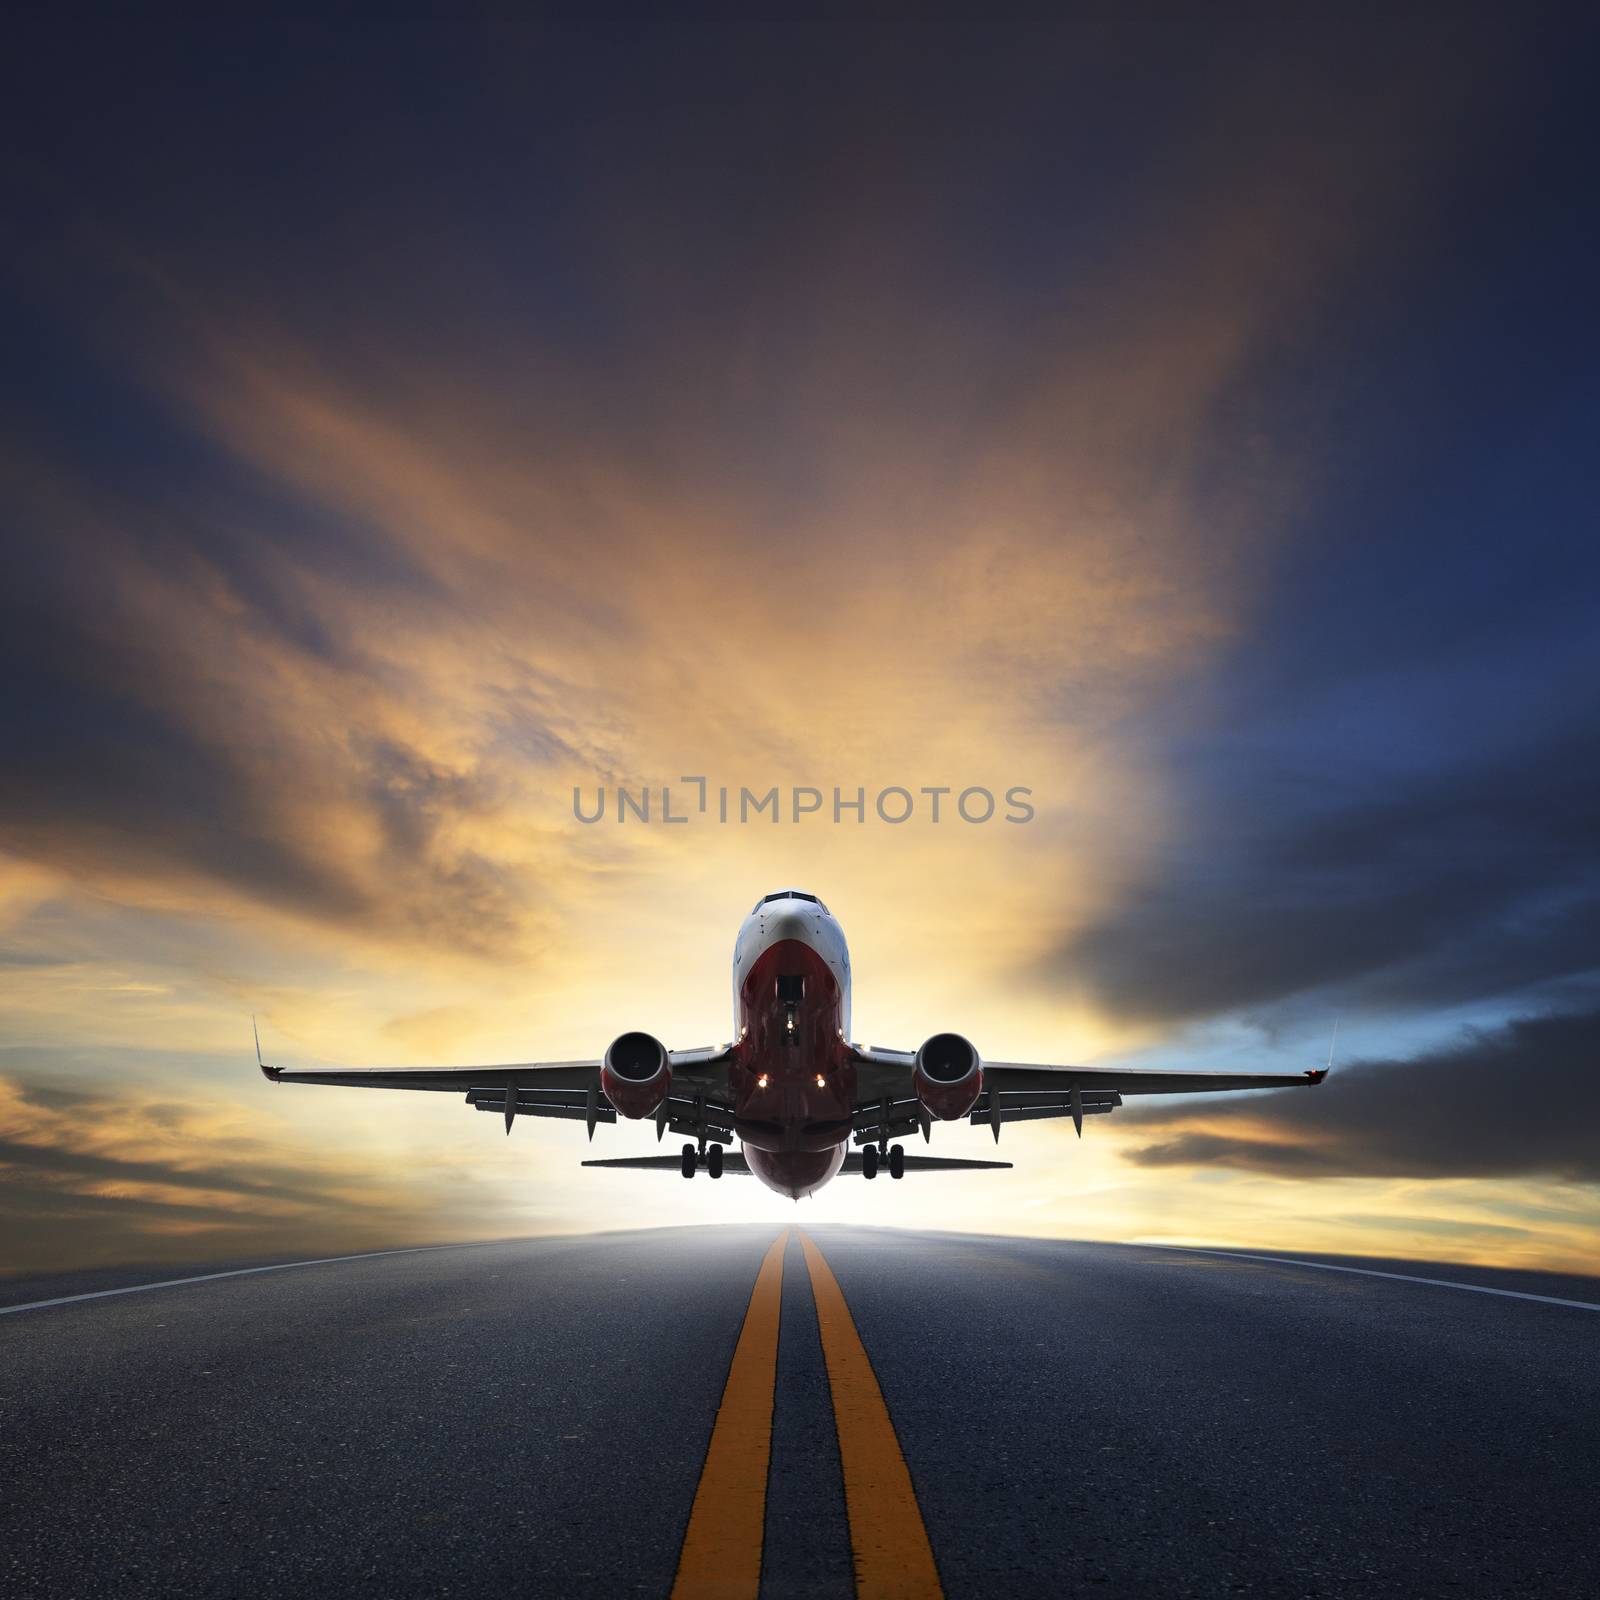 passenger plane take off from runways against beautiful dusky sk by khunaspix